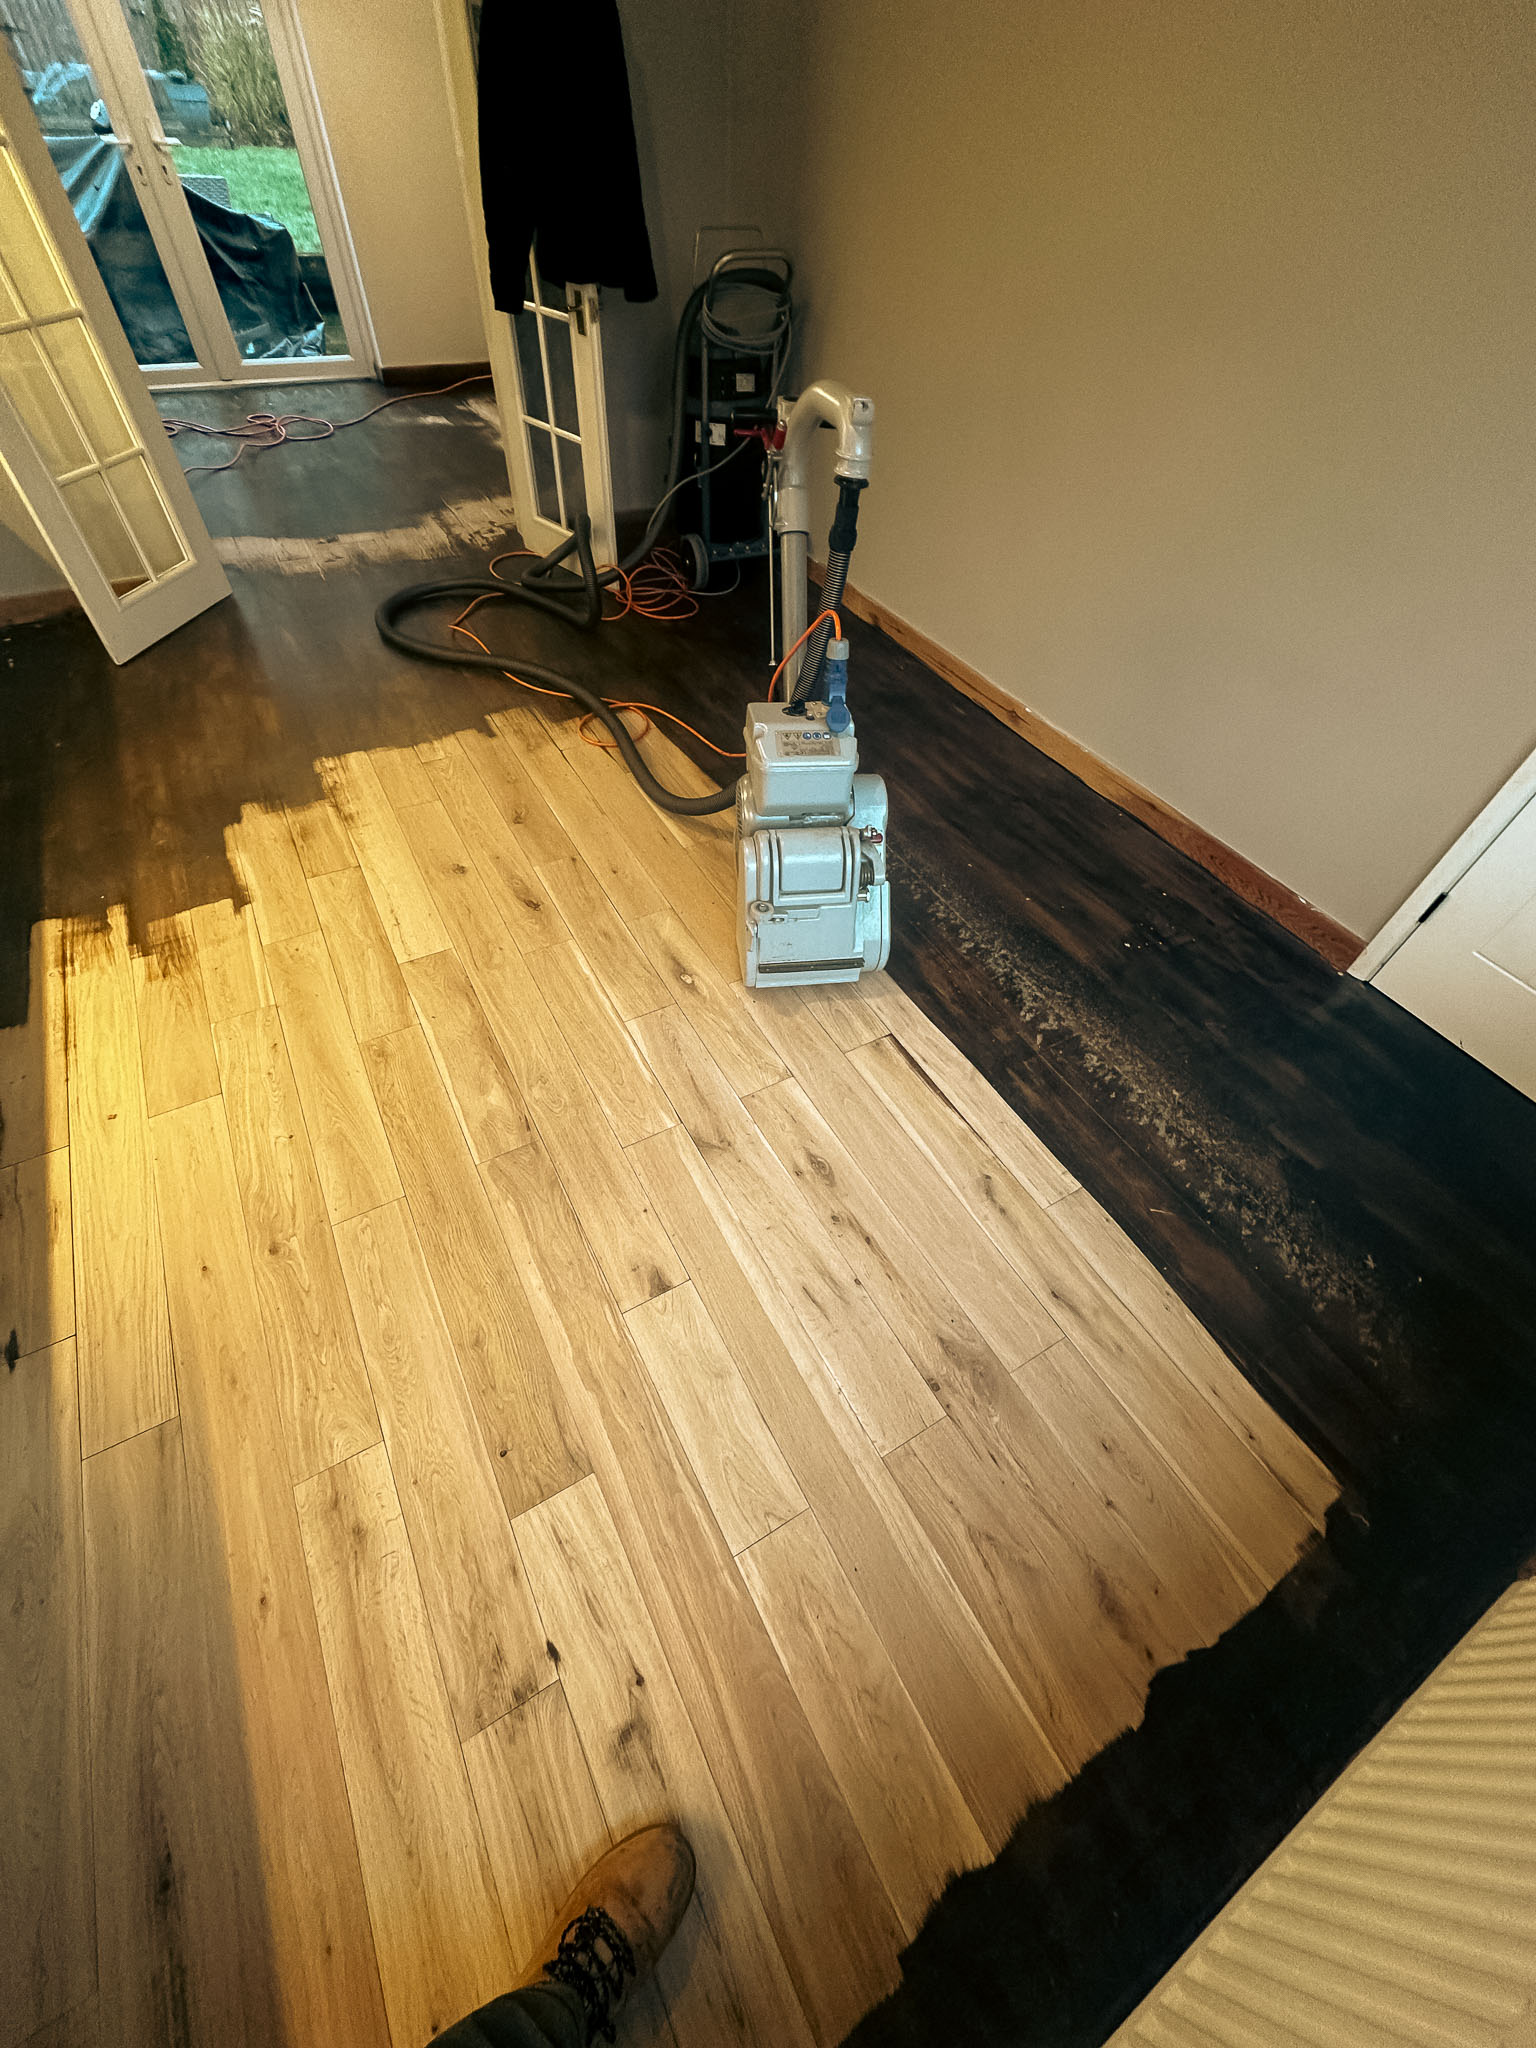 Wood floor sanding and restoration in Harrogate by TF Building and renovations. Hard wax oil finish